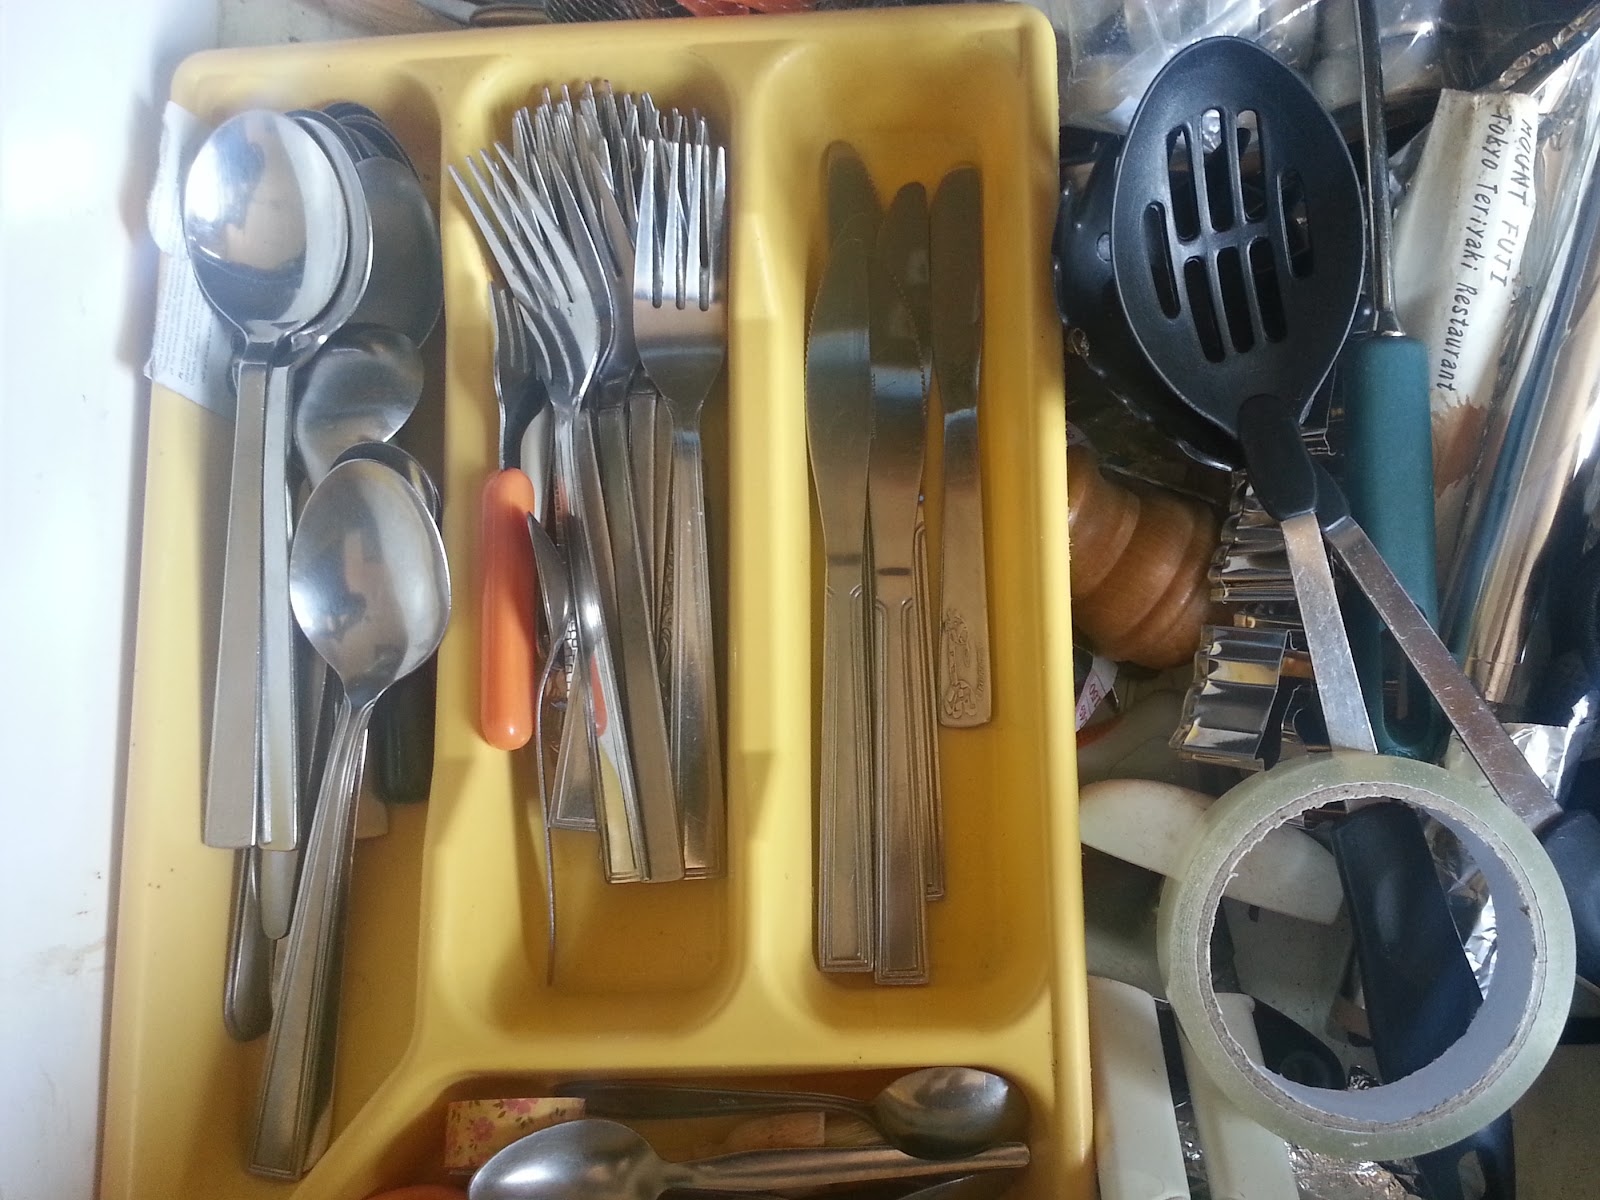 , Inside the Kitchen Drawer- Organising Cutlery